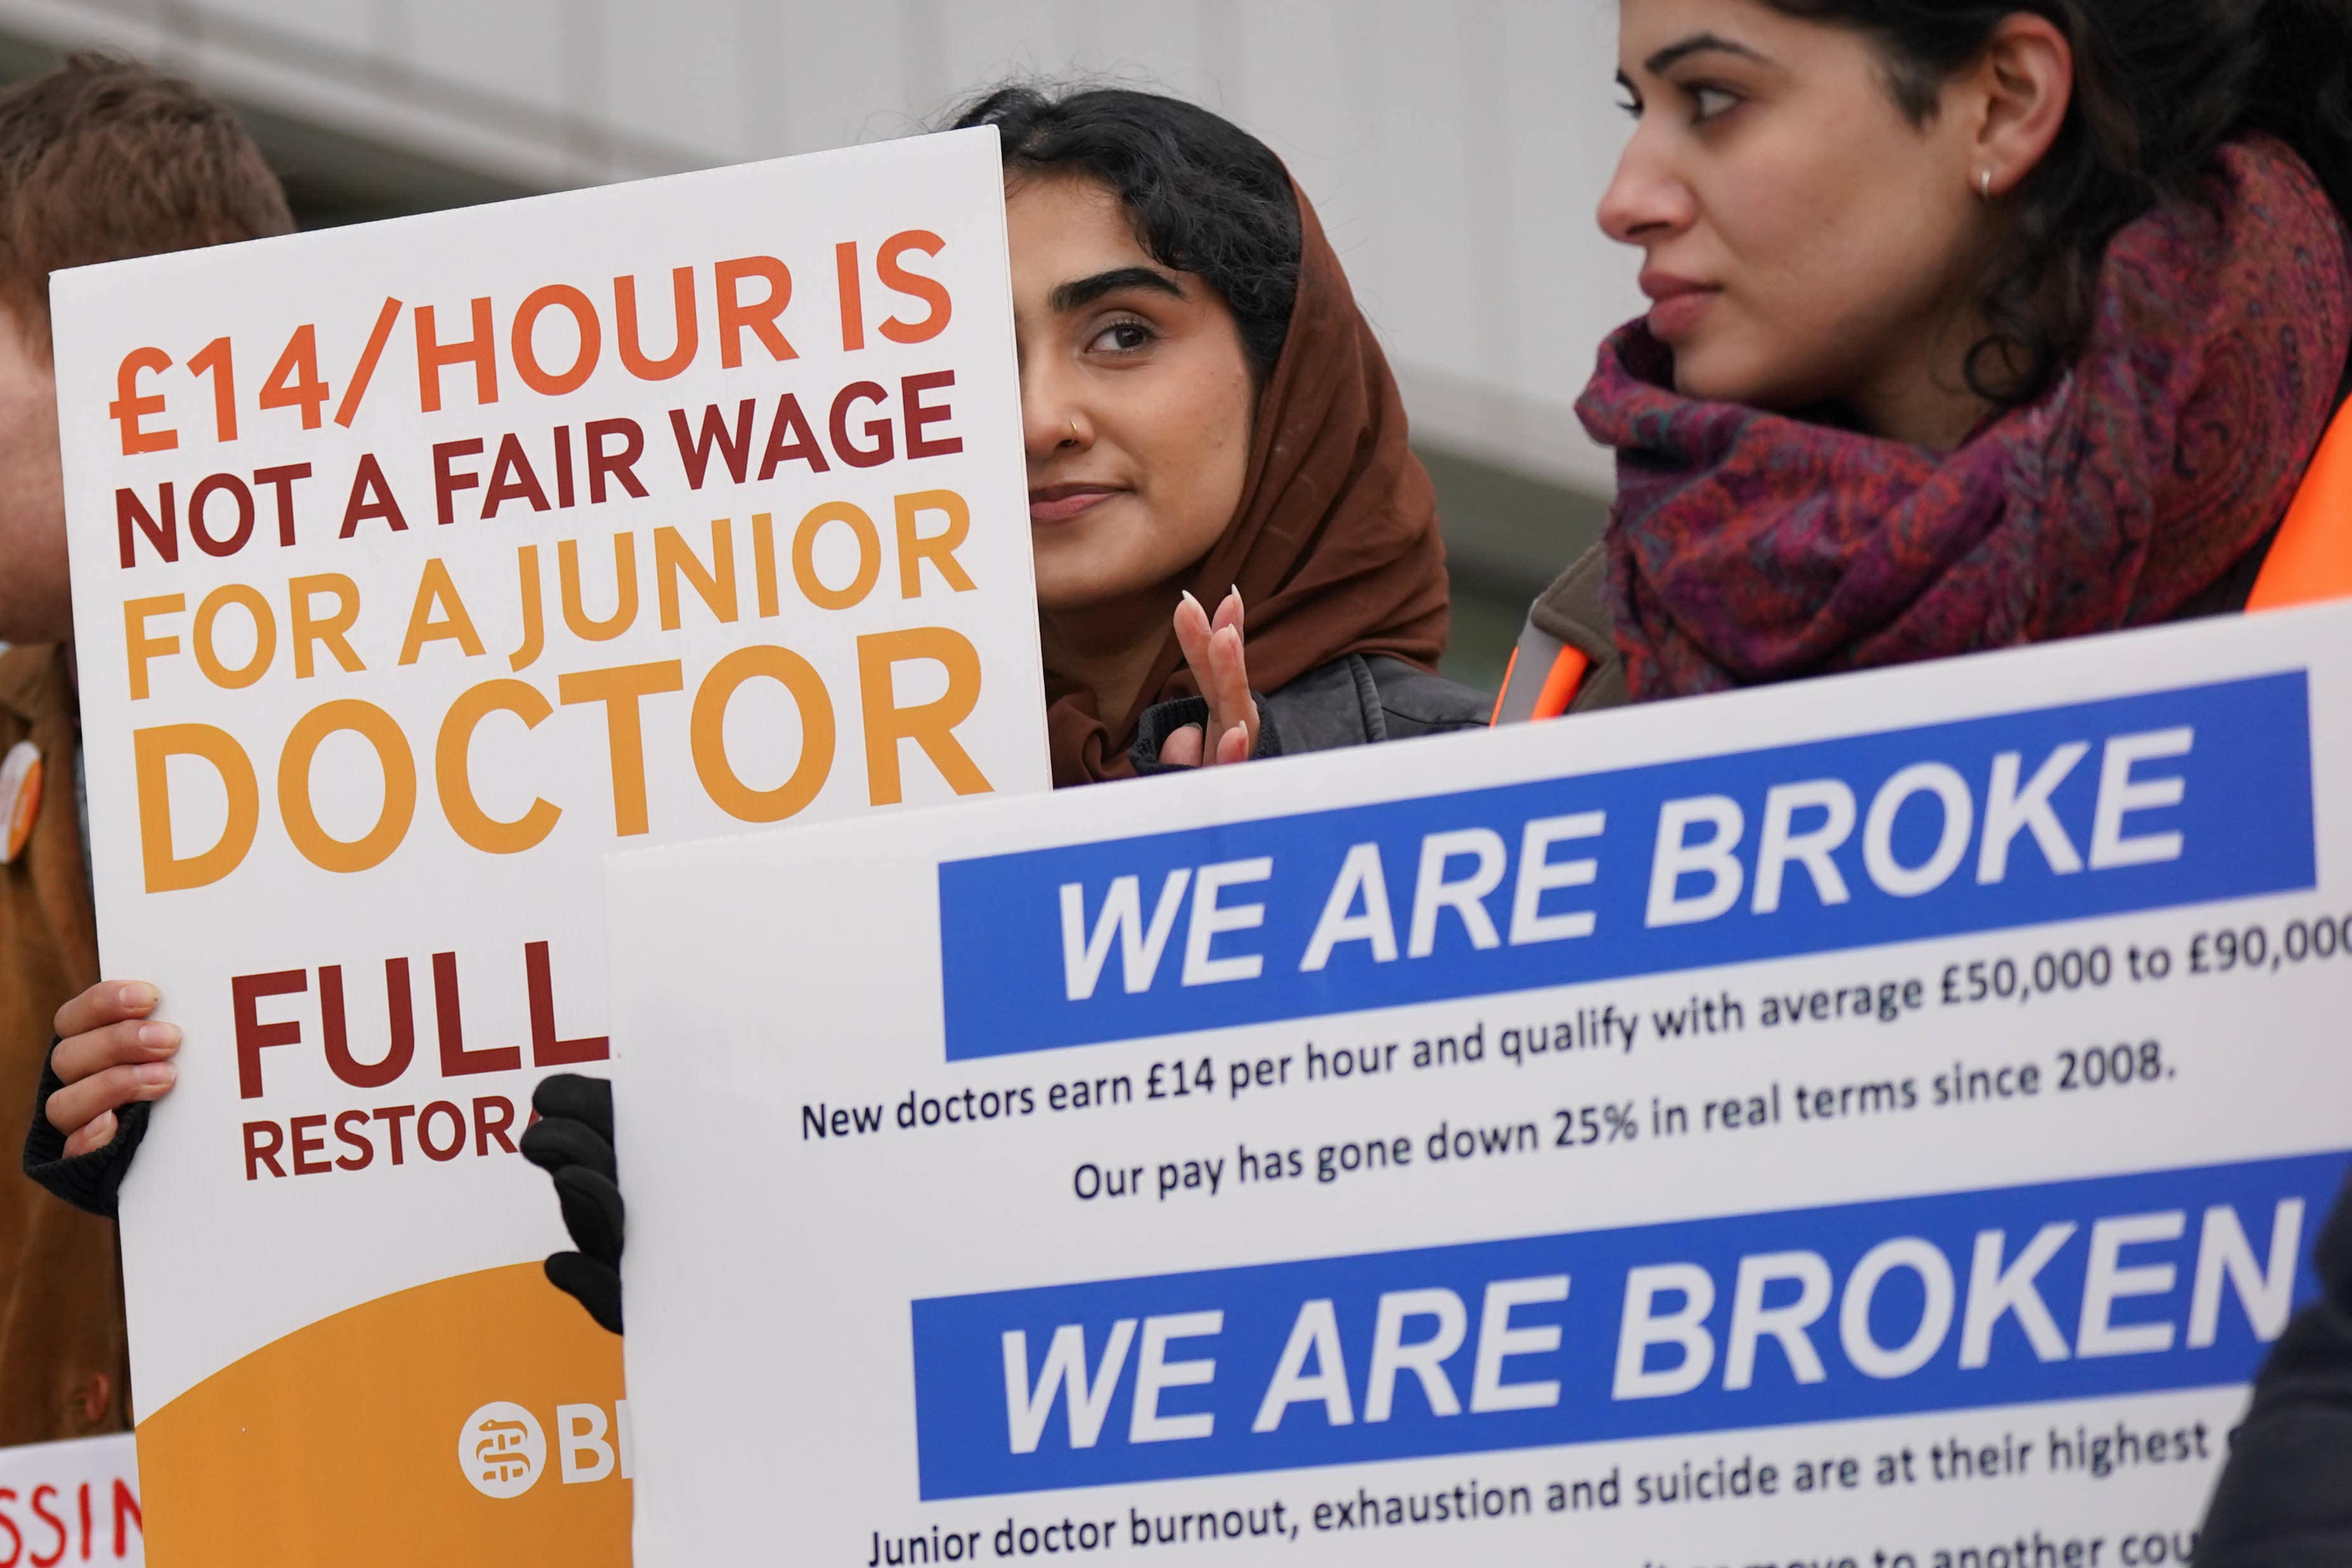 The BMA has highlighted the low pay as part of a new advertising campaign in support of the pay dispute by junior doctors in England.